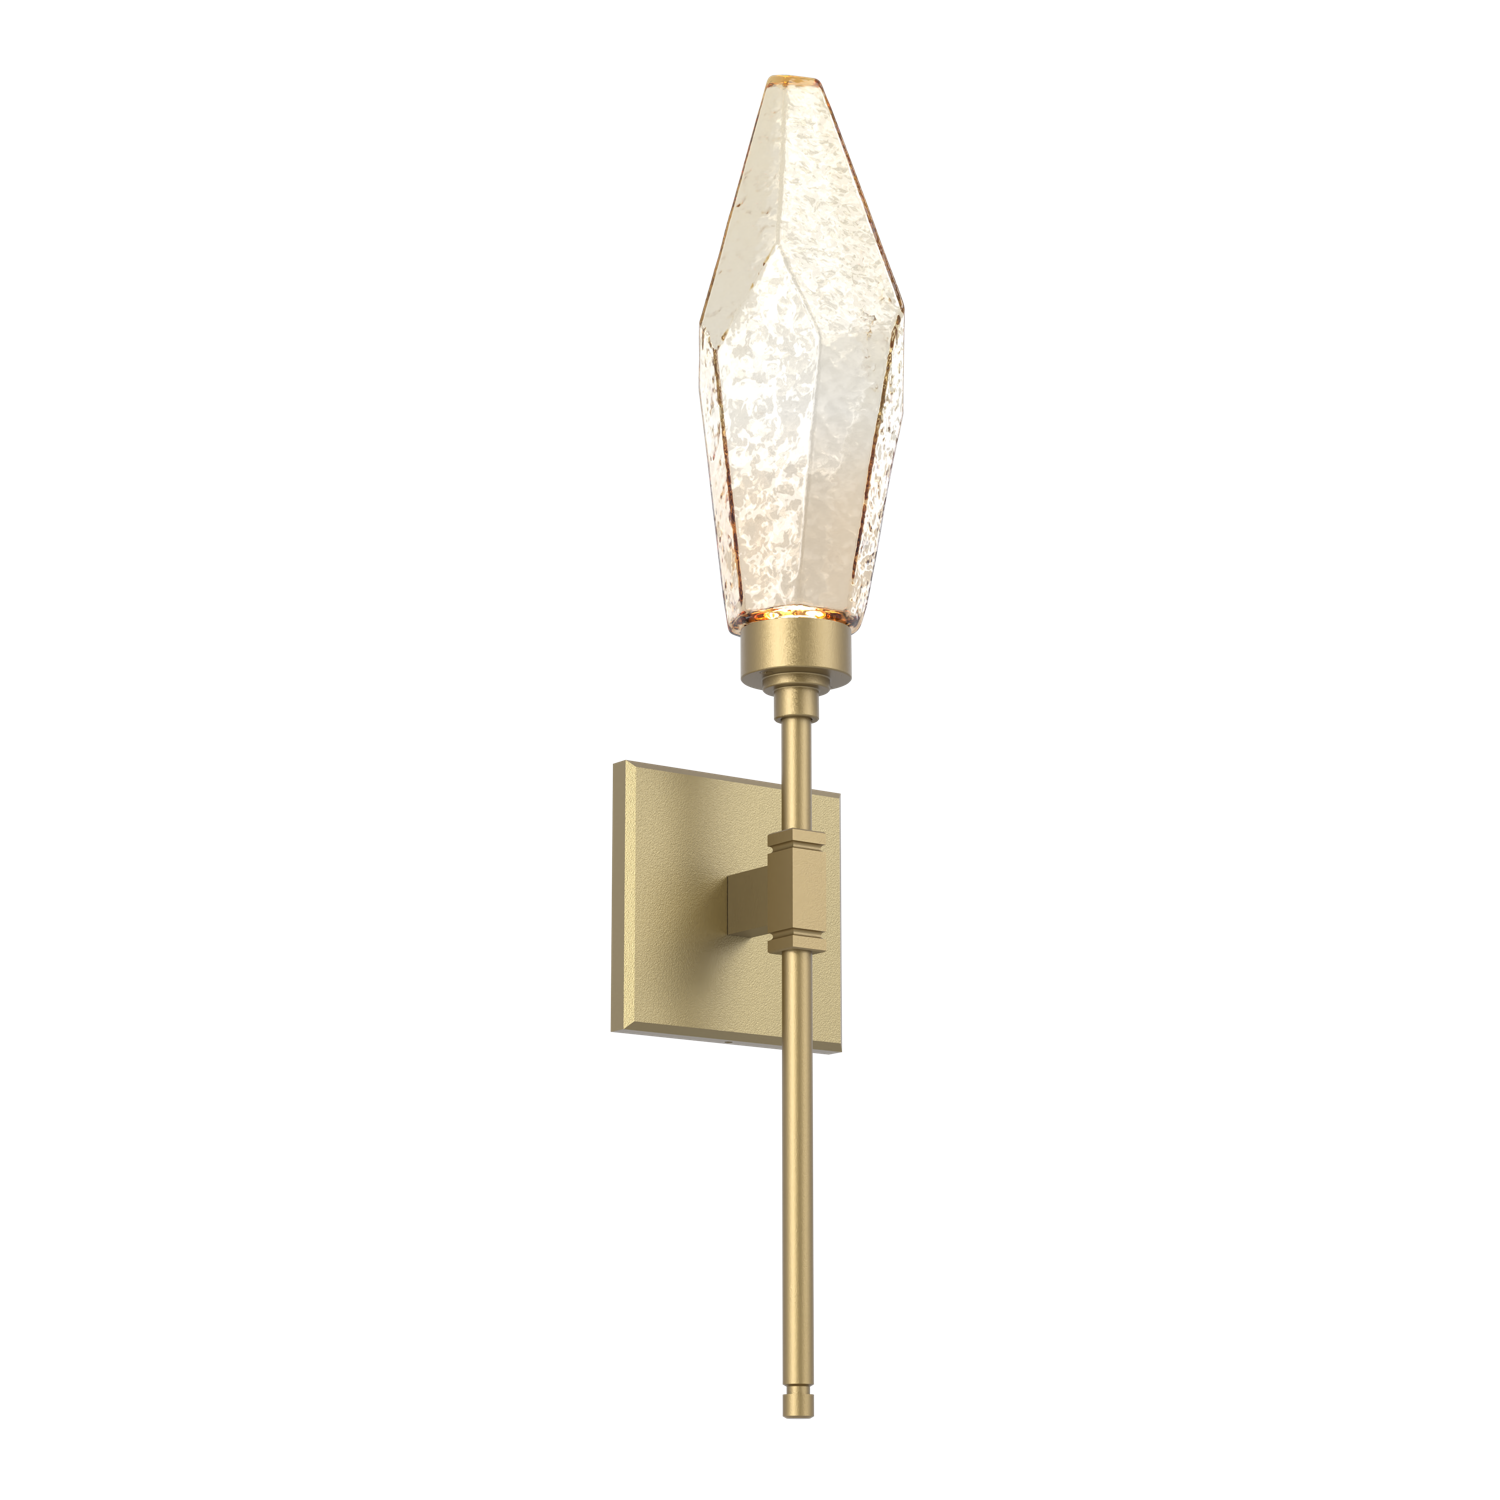 IDB0050-04-GB-CA-Hammerton-Studio-Rock-Crystal-ada-certified-belvedere-wall-sconce-with-gilded-brass-finish-and-chilled-amber-blown-glass-shades-and-LED-lamping